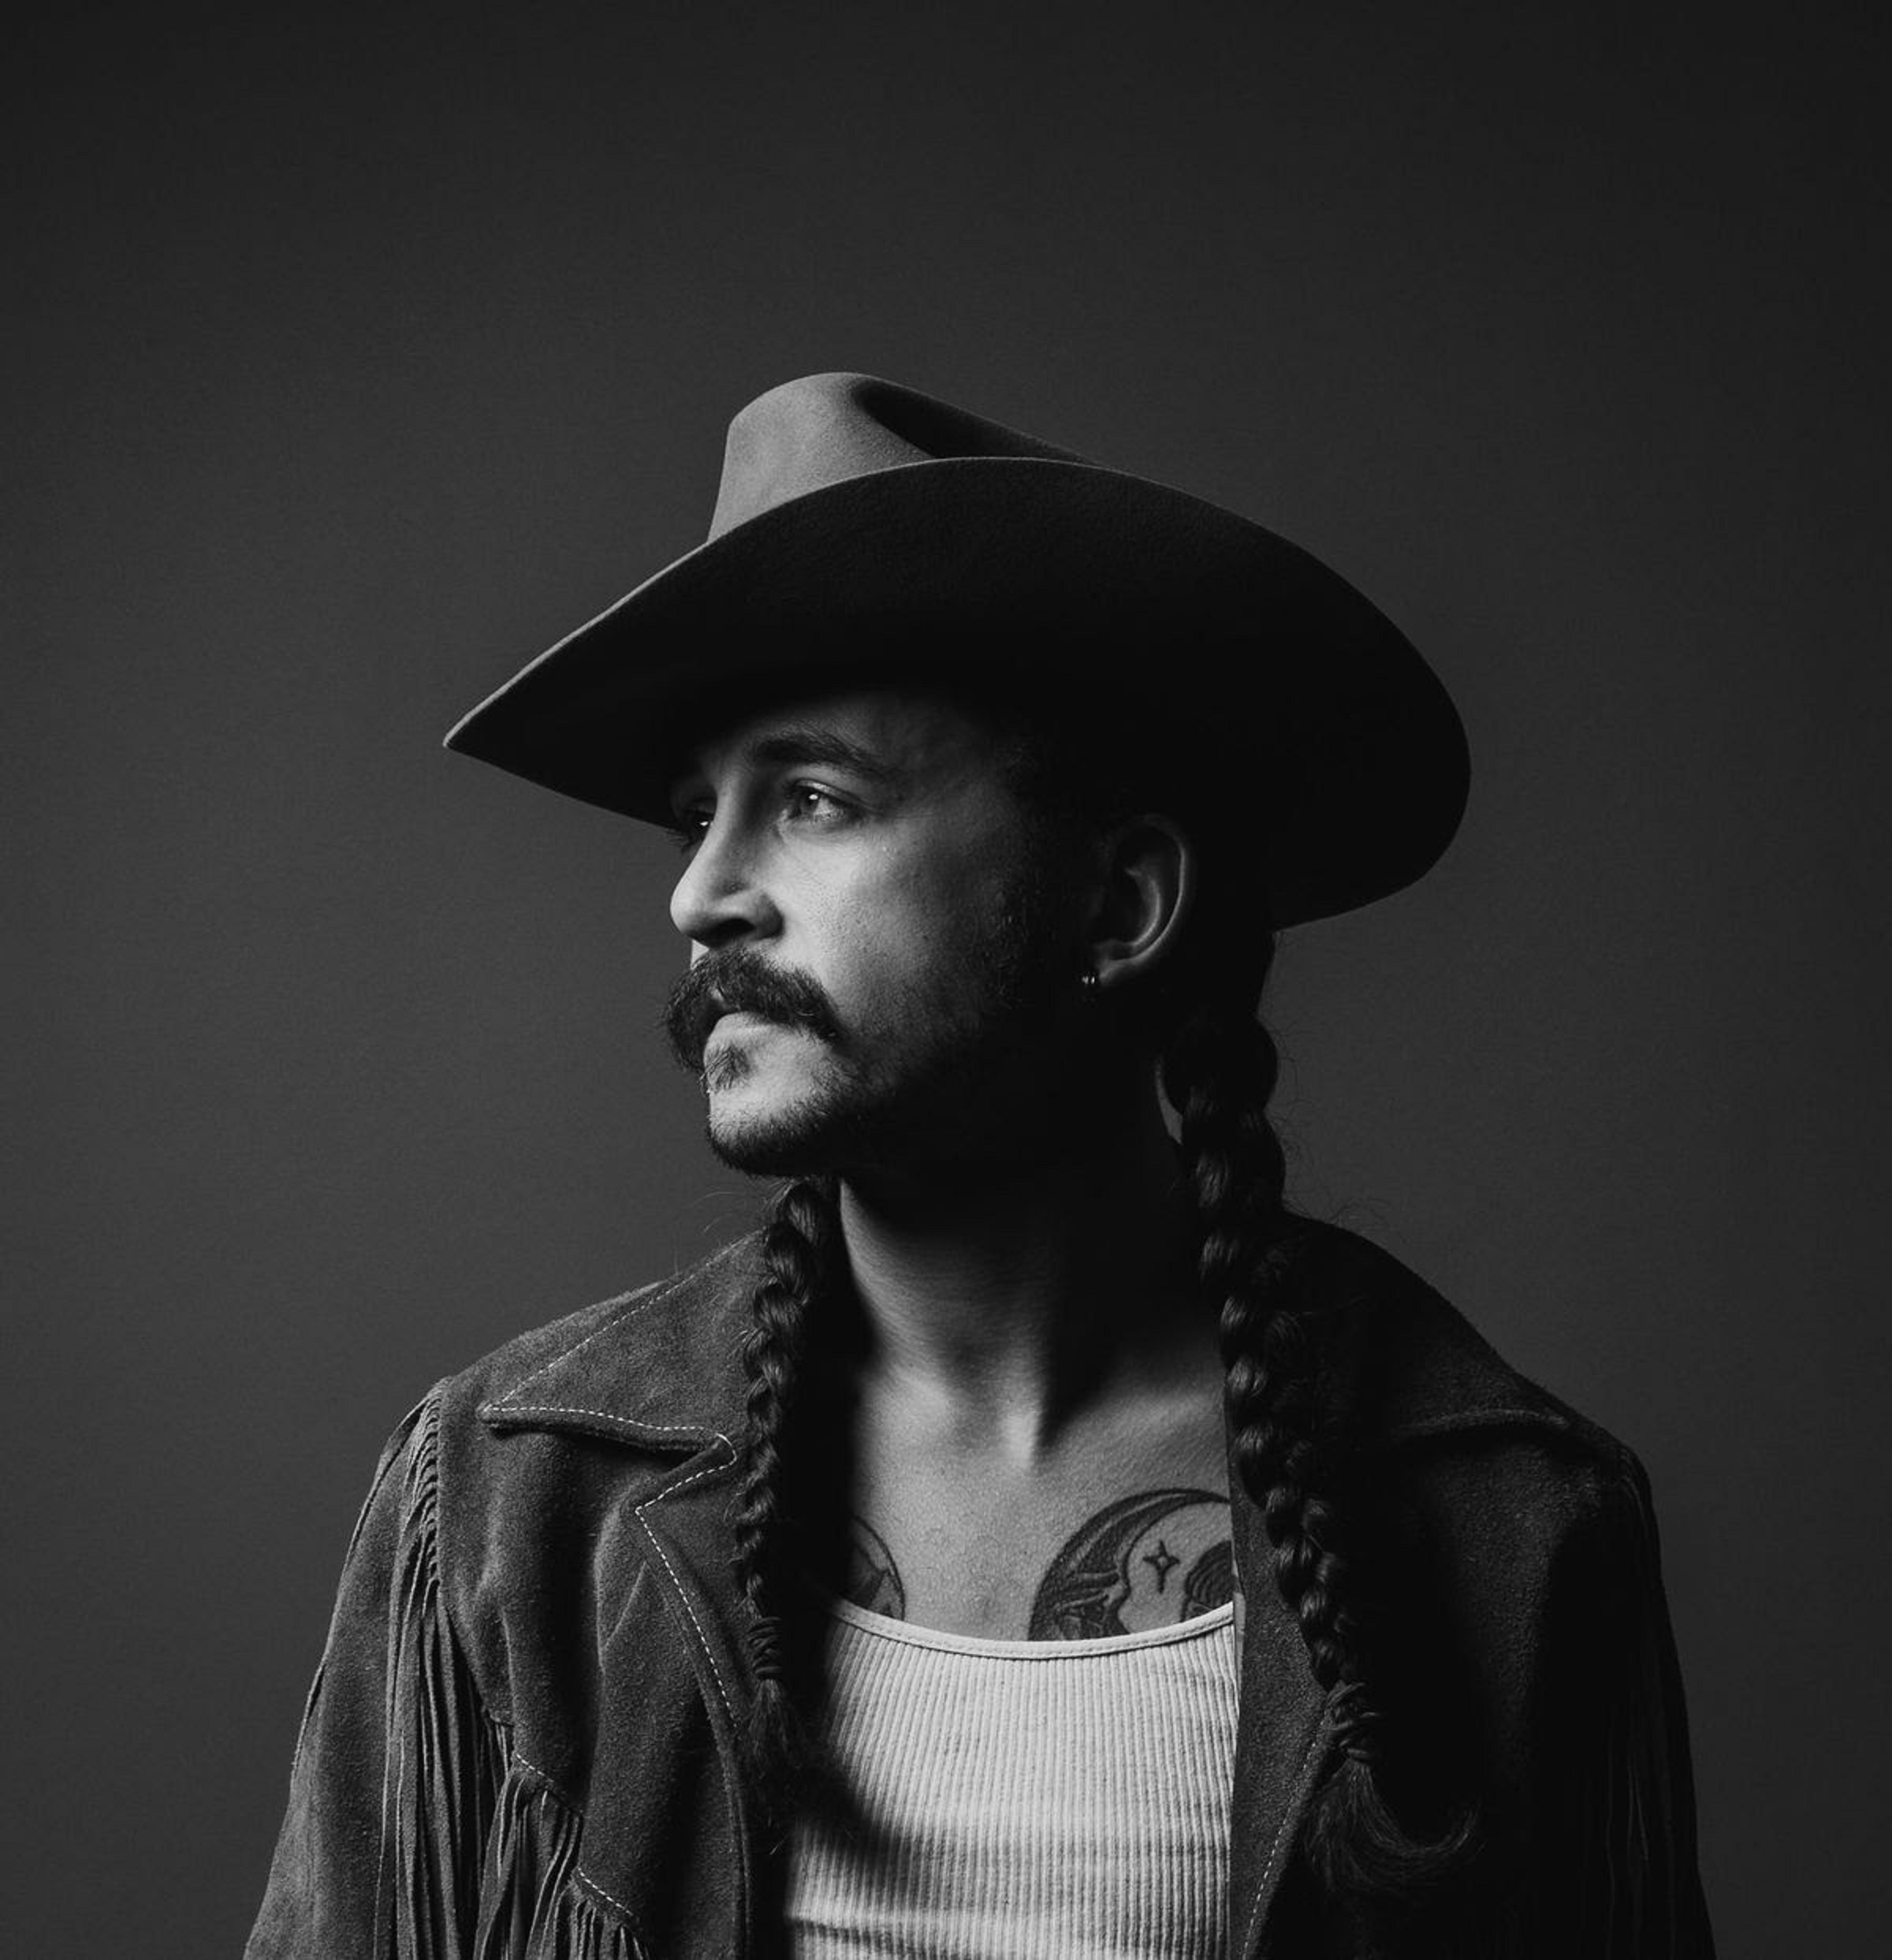 Nashville's Zach Willdee announces new LP due May 6